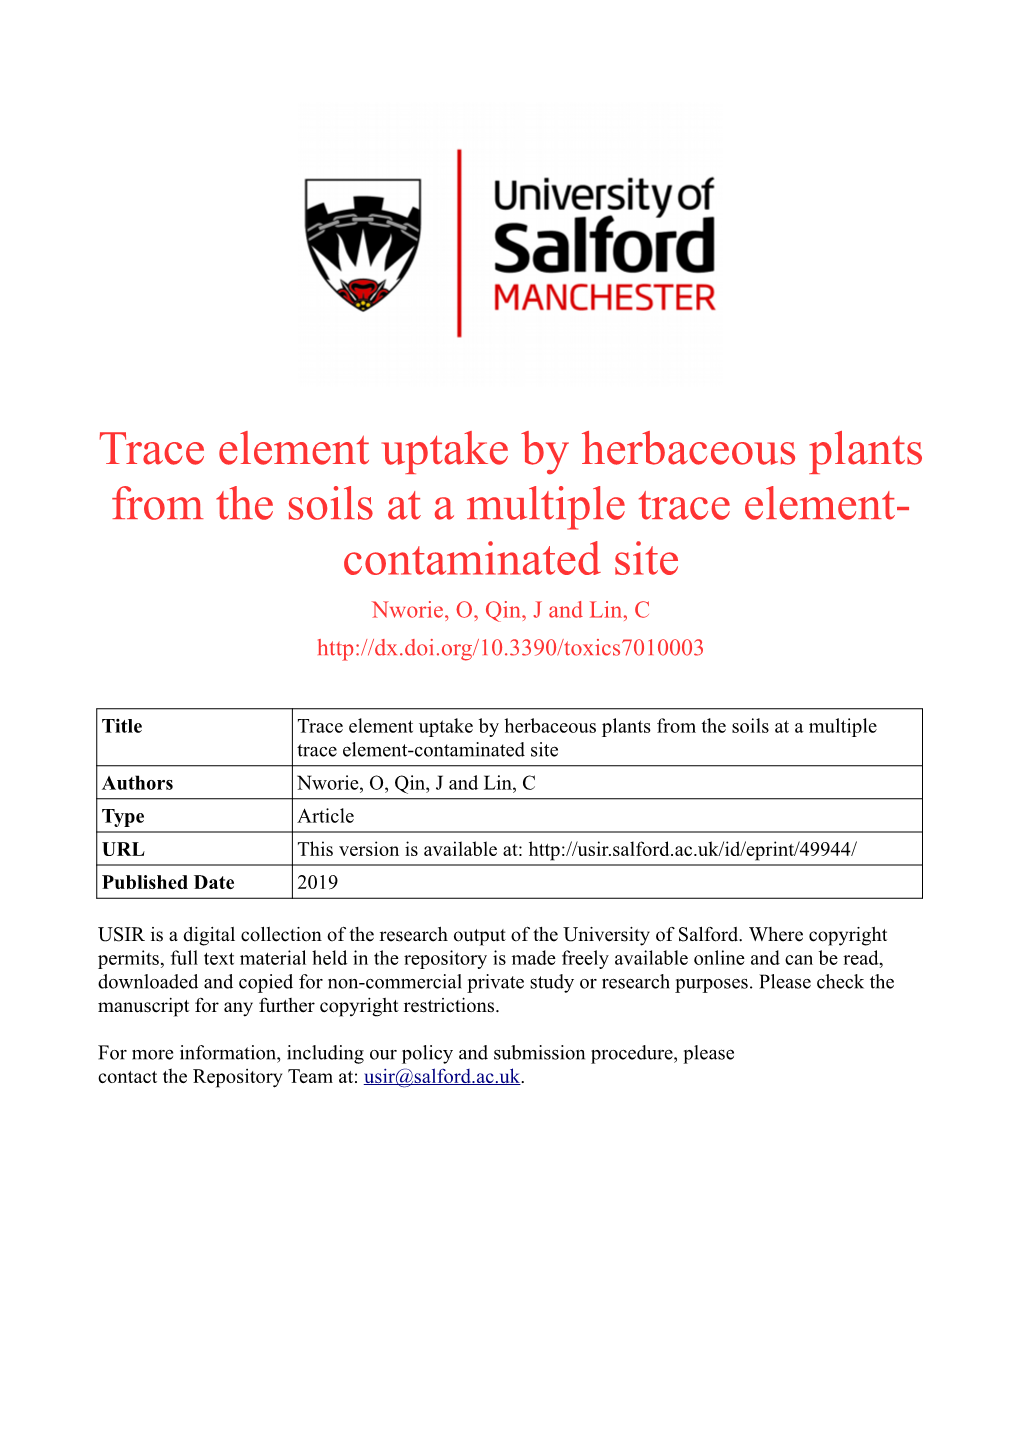 Trace Element Uptake by Herbaceous Plants from the Soils at a Multiple